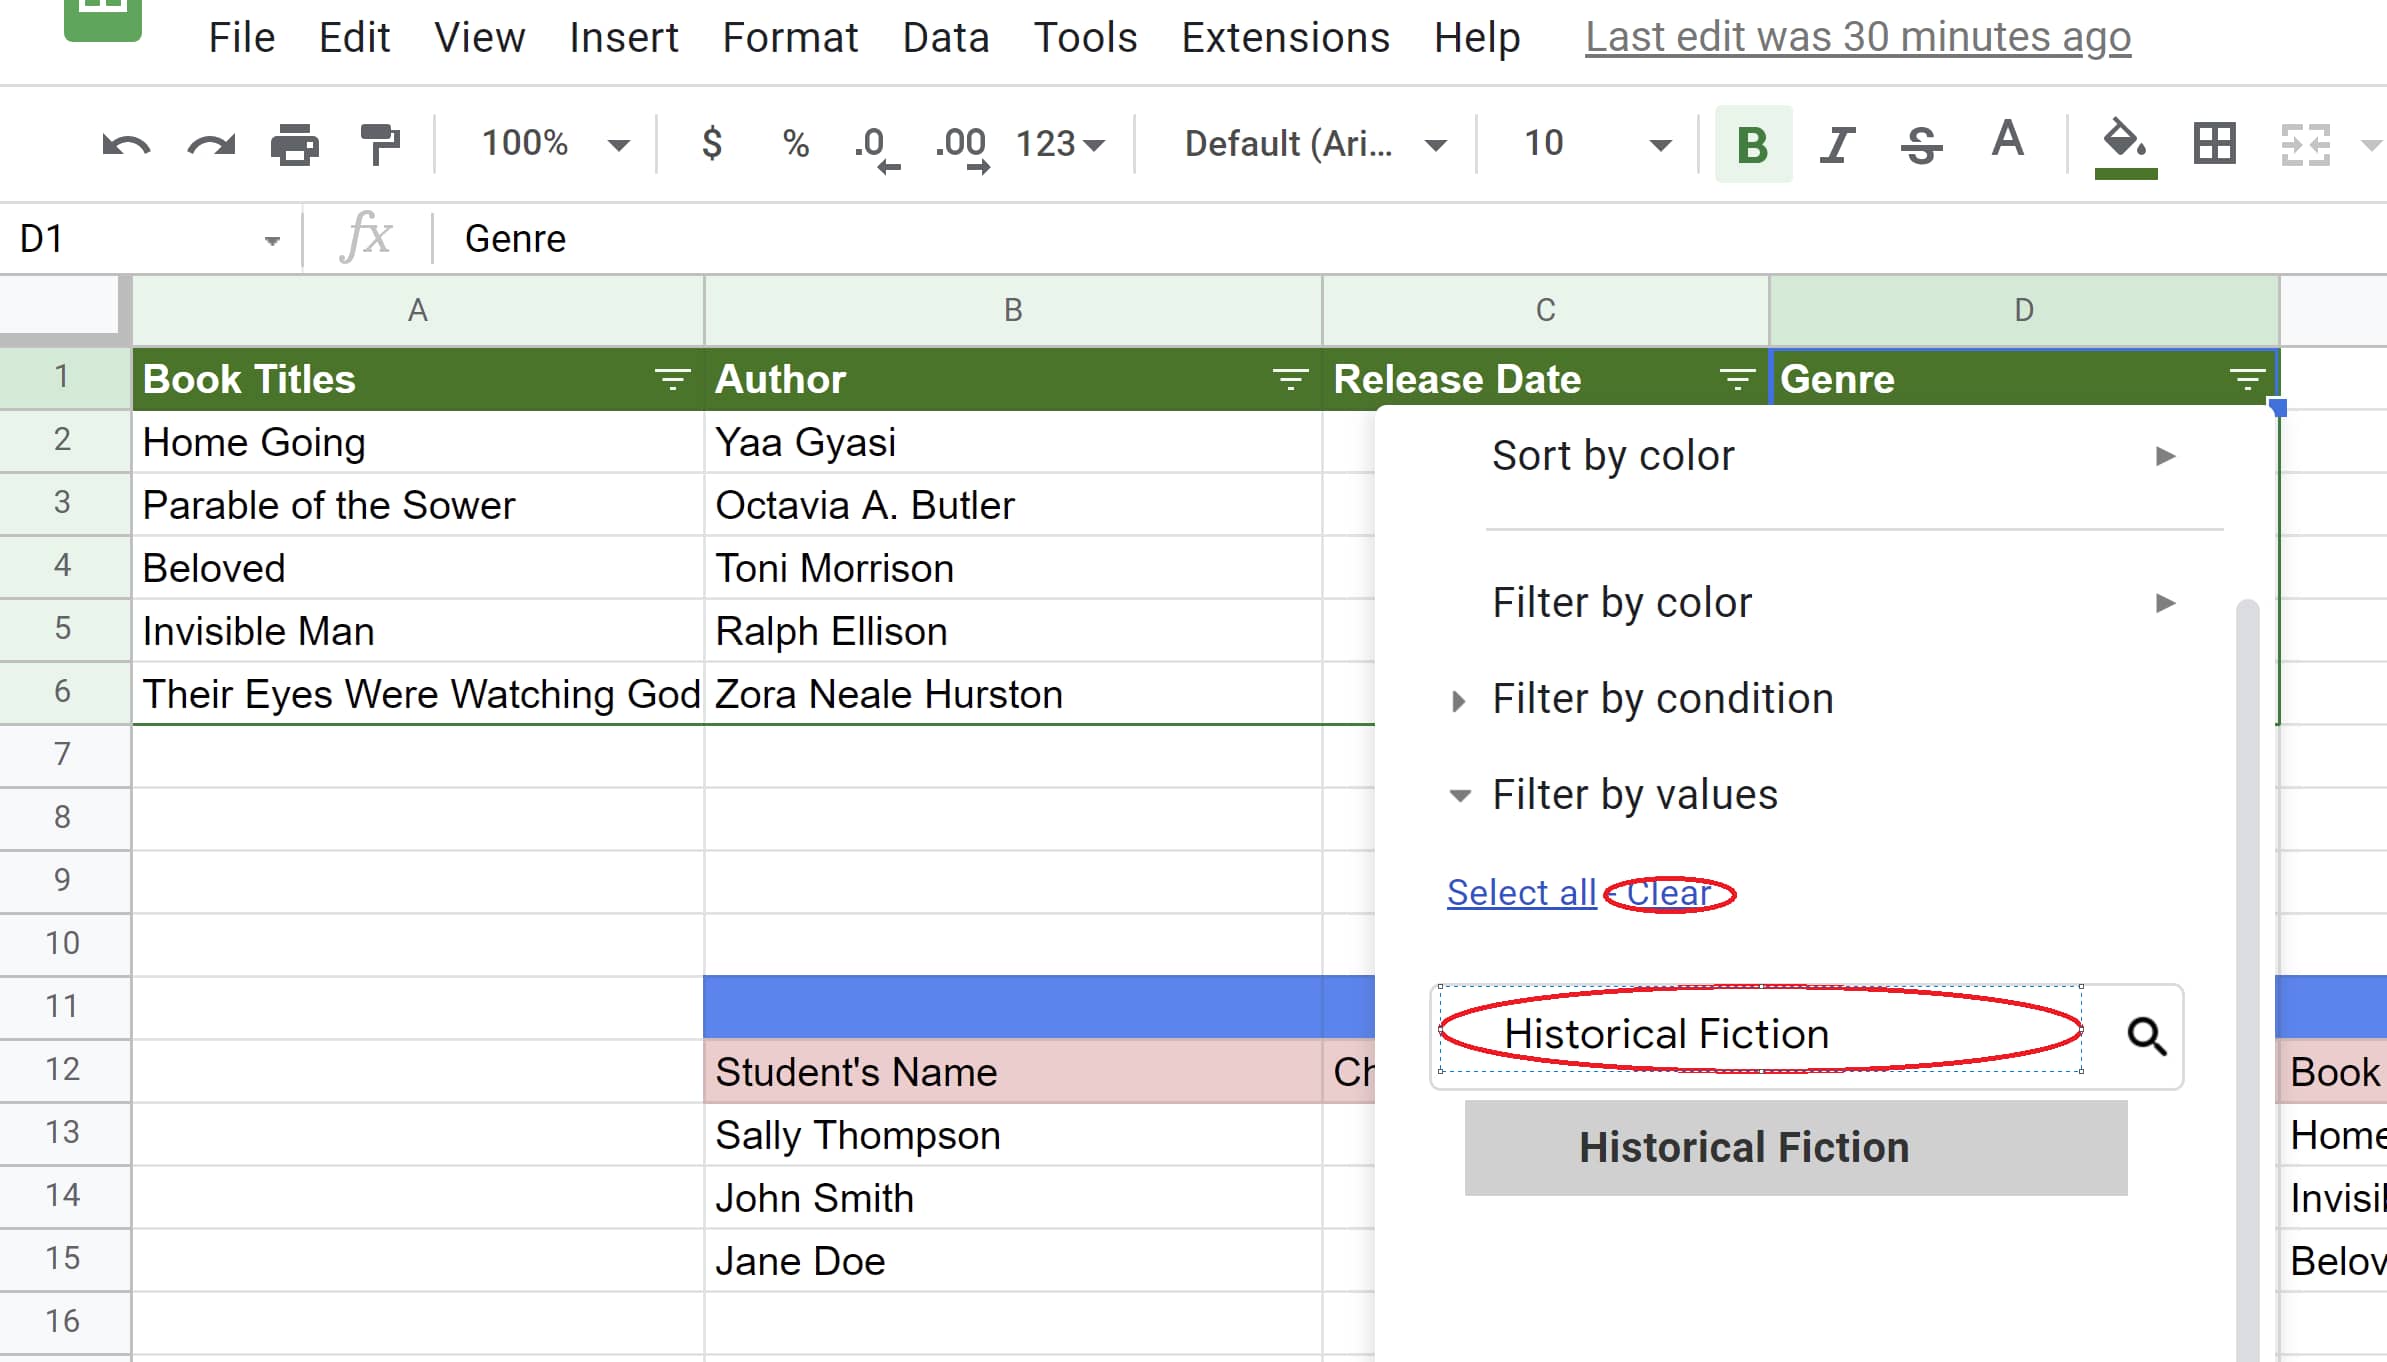 Historical Fiction data value is selected while other values ​​are de-selected in Google Sheets